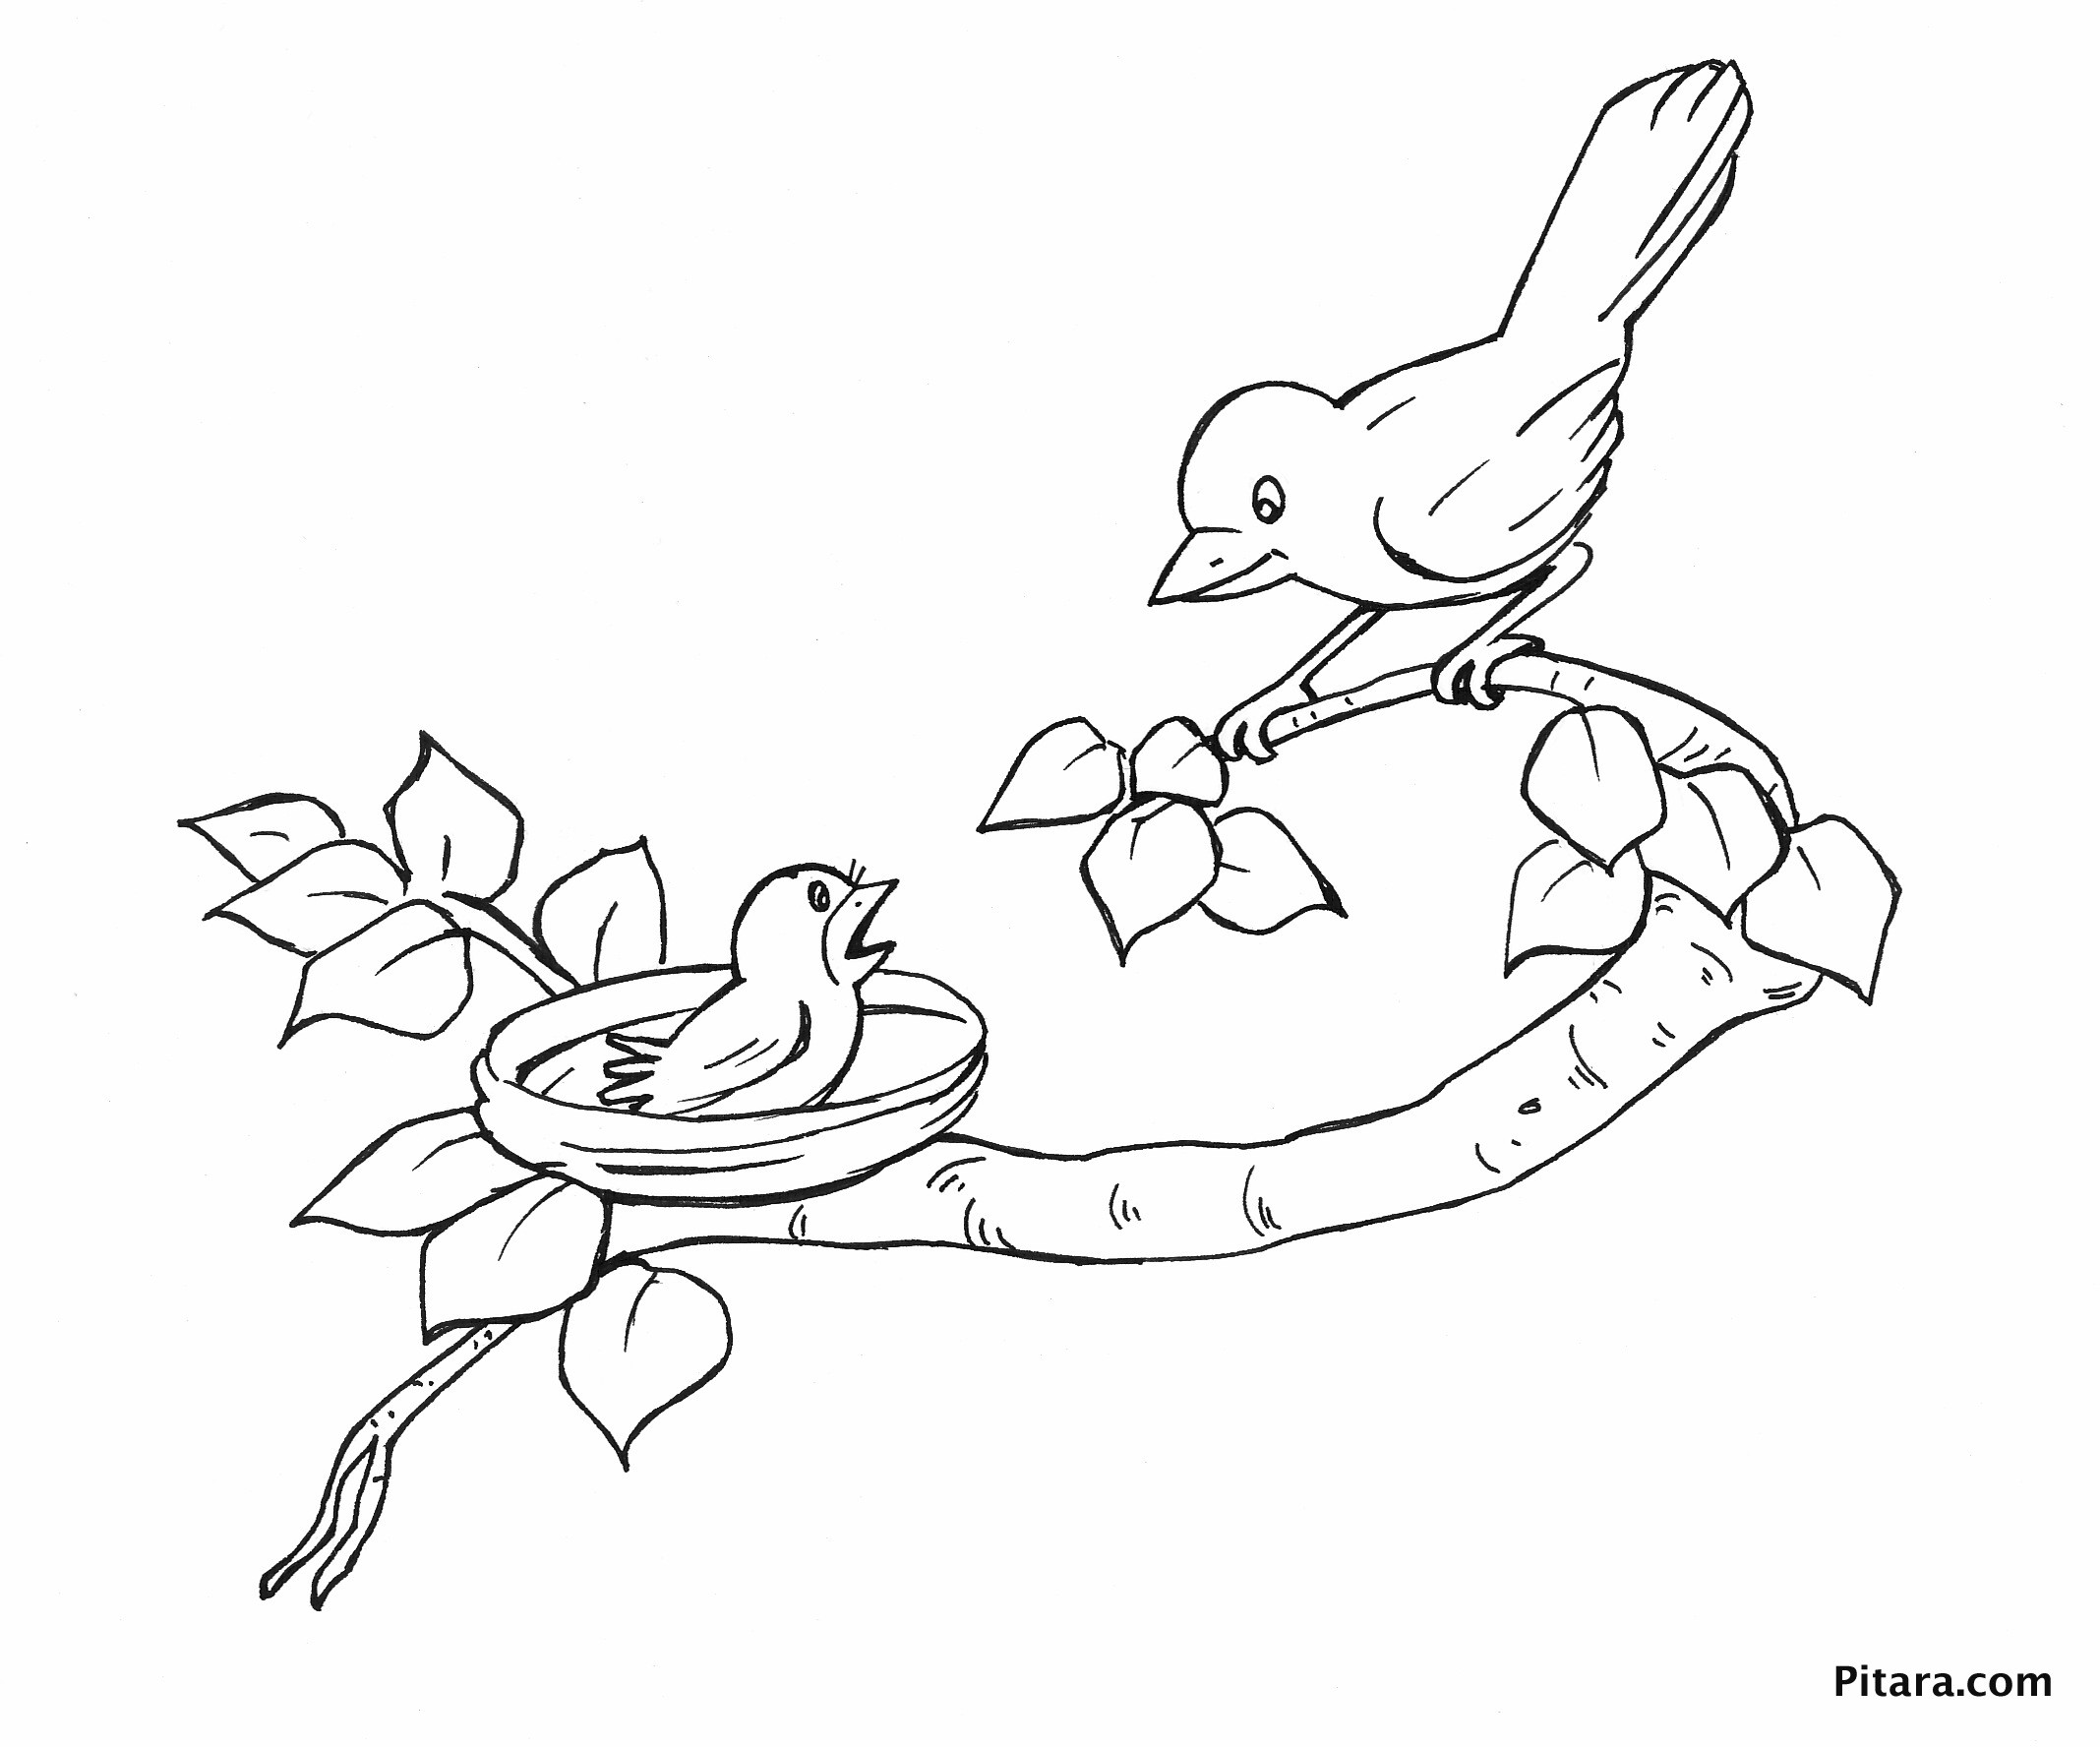 Baby Bird Coloring Pages
 Mother & baby bird – Coloring page